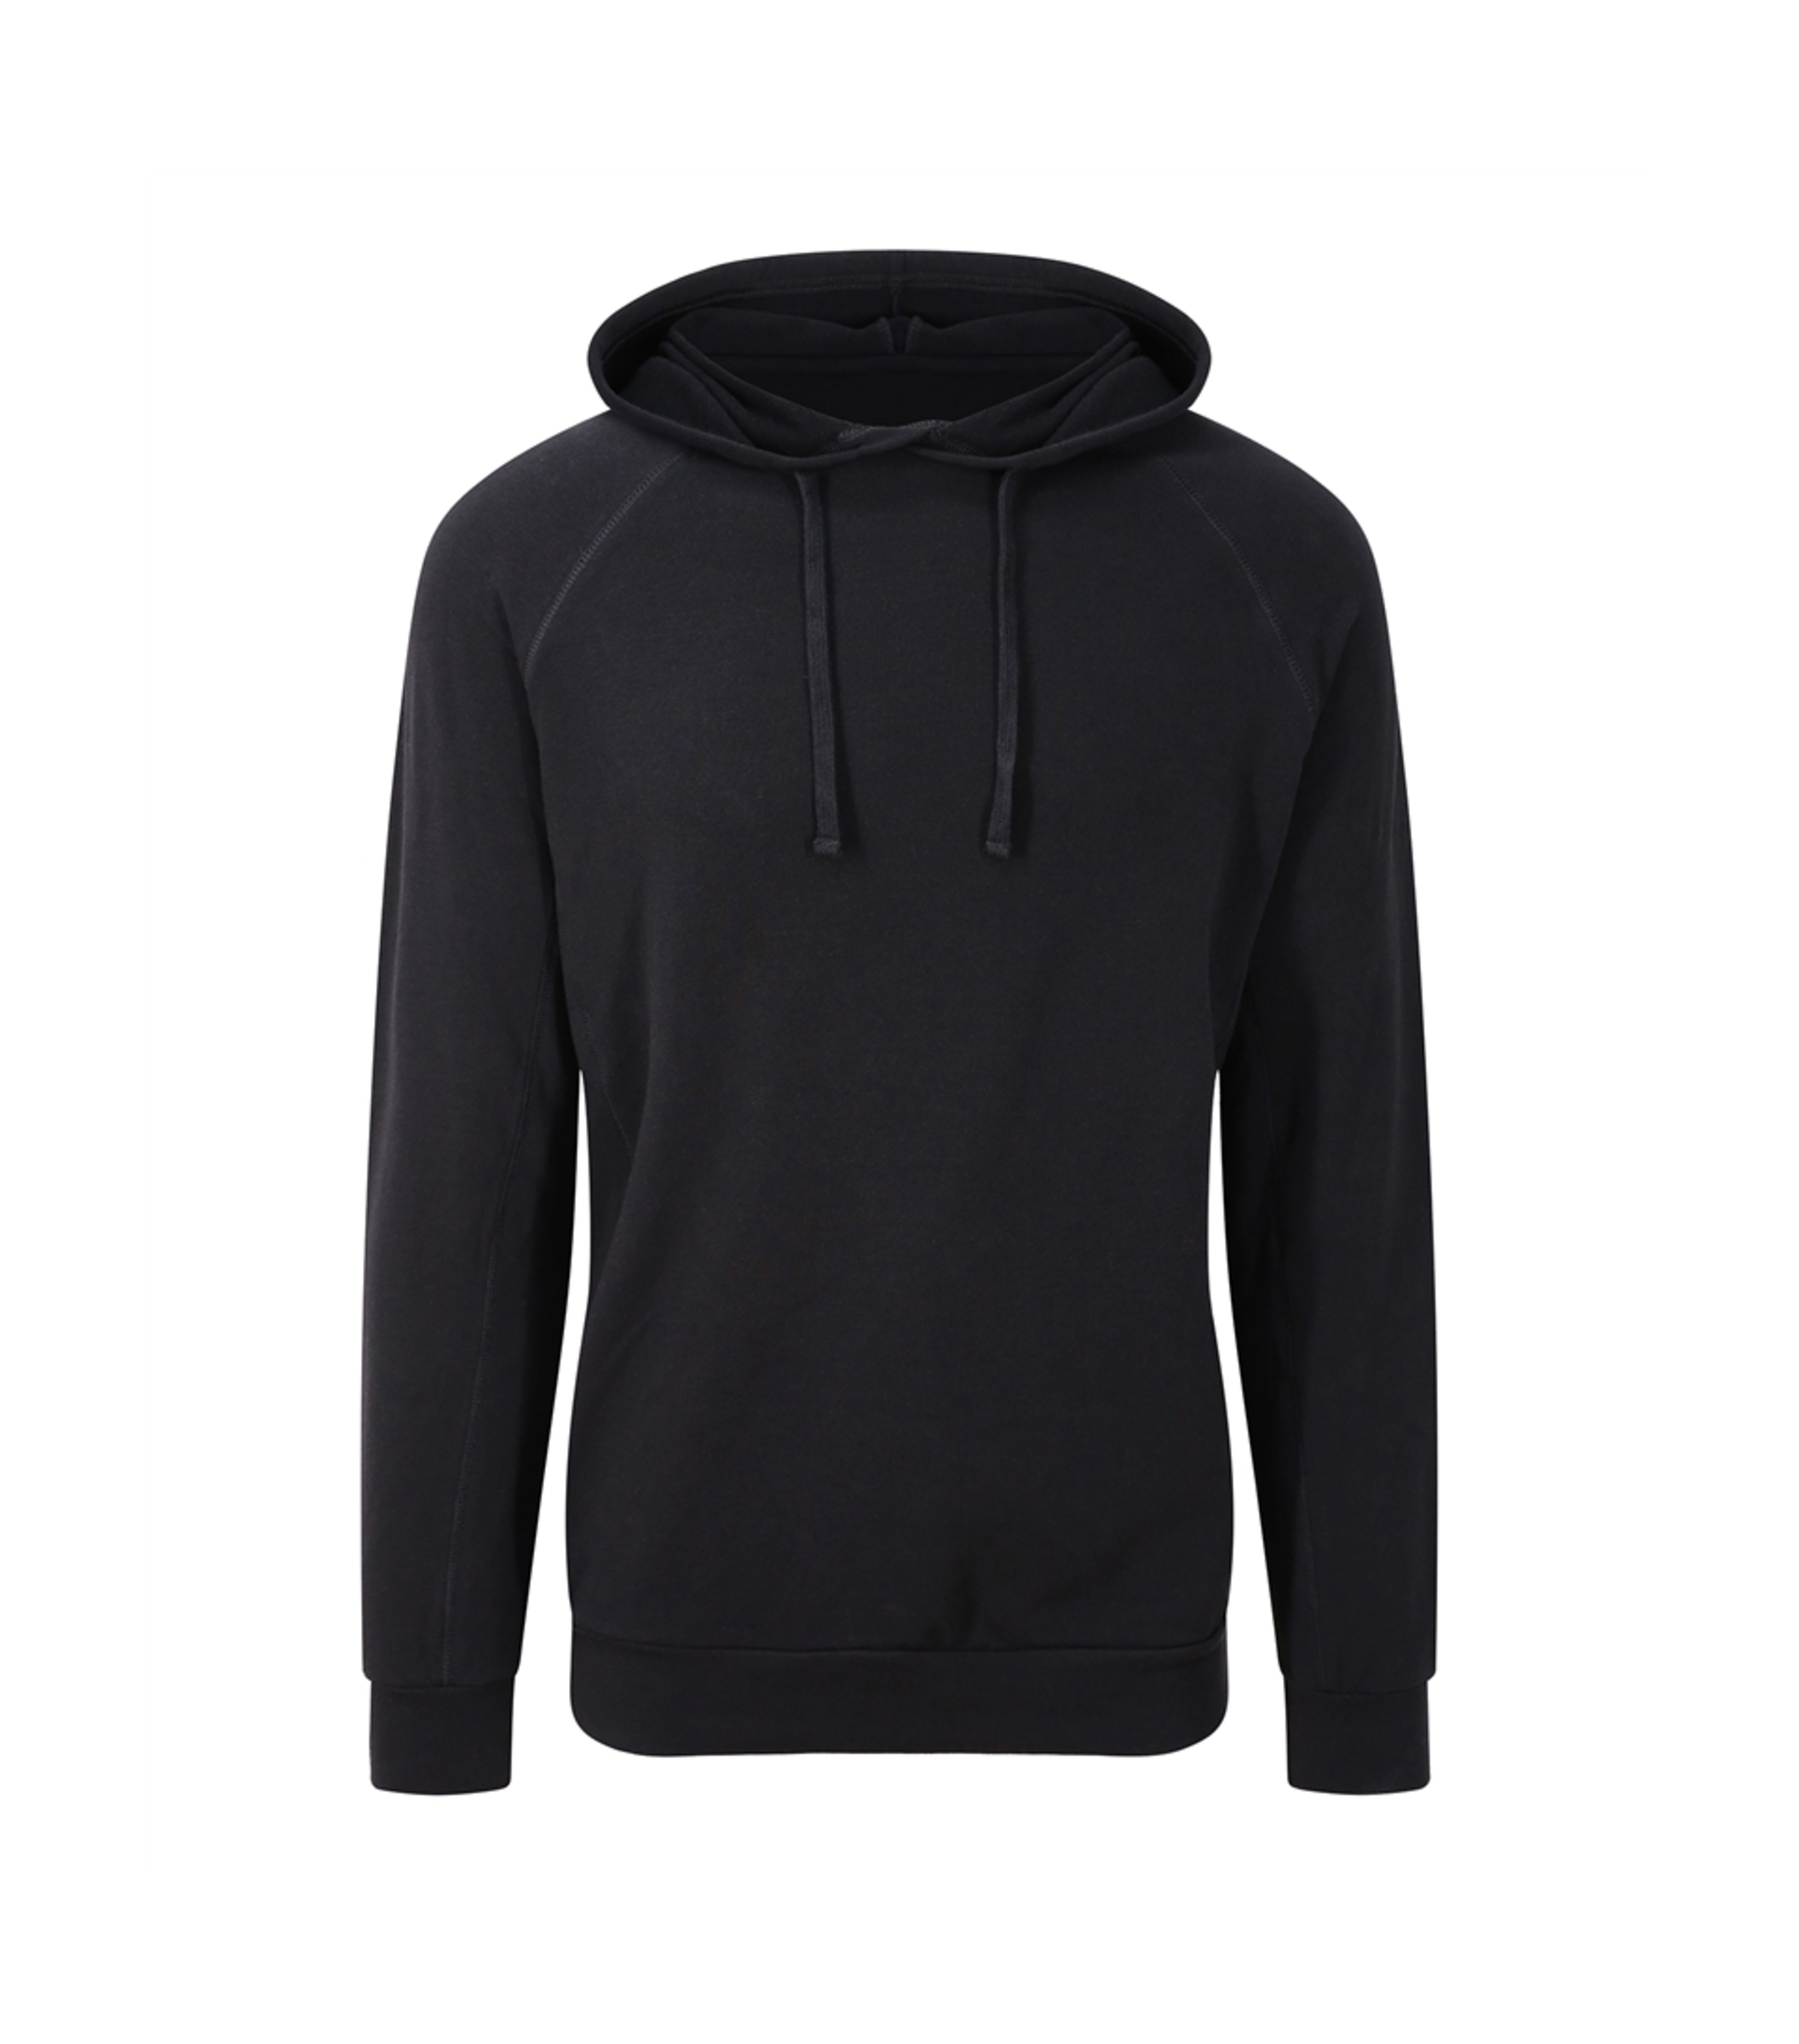 Just Cool Cool Fitness Hoodie - Jet Black - S